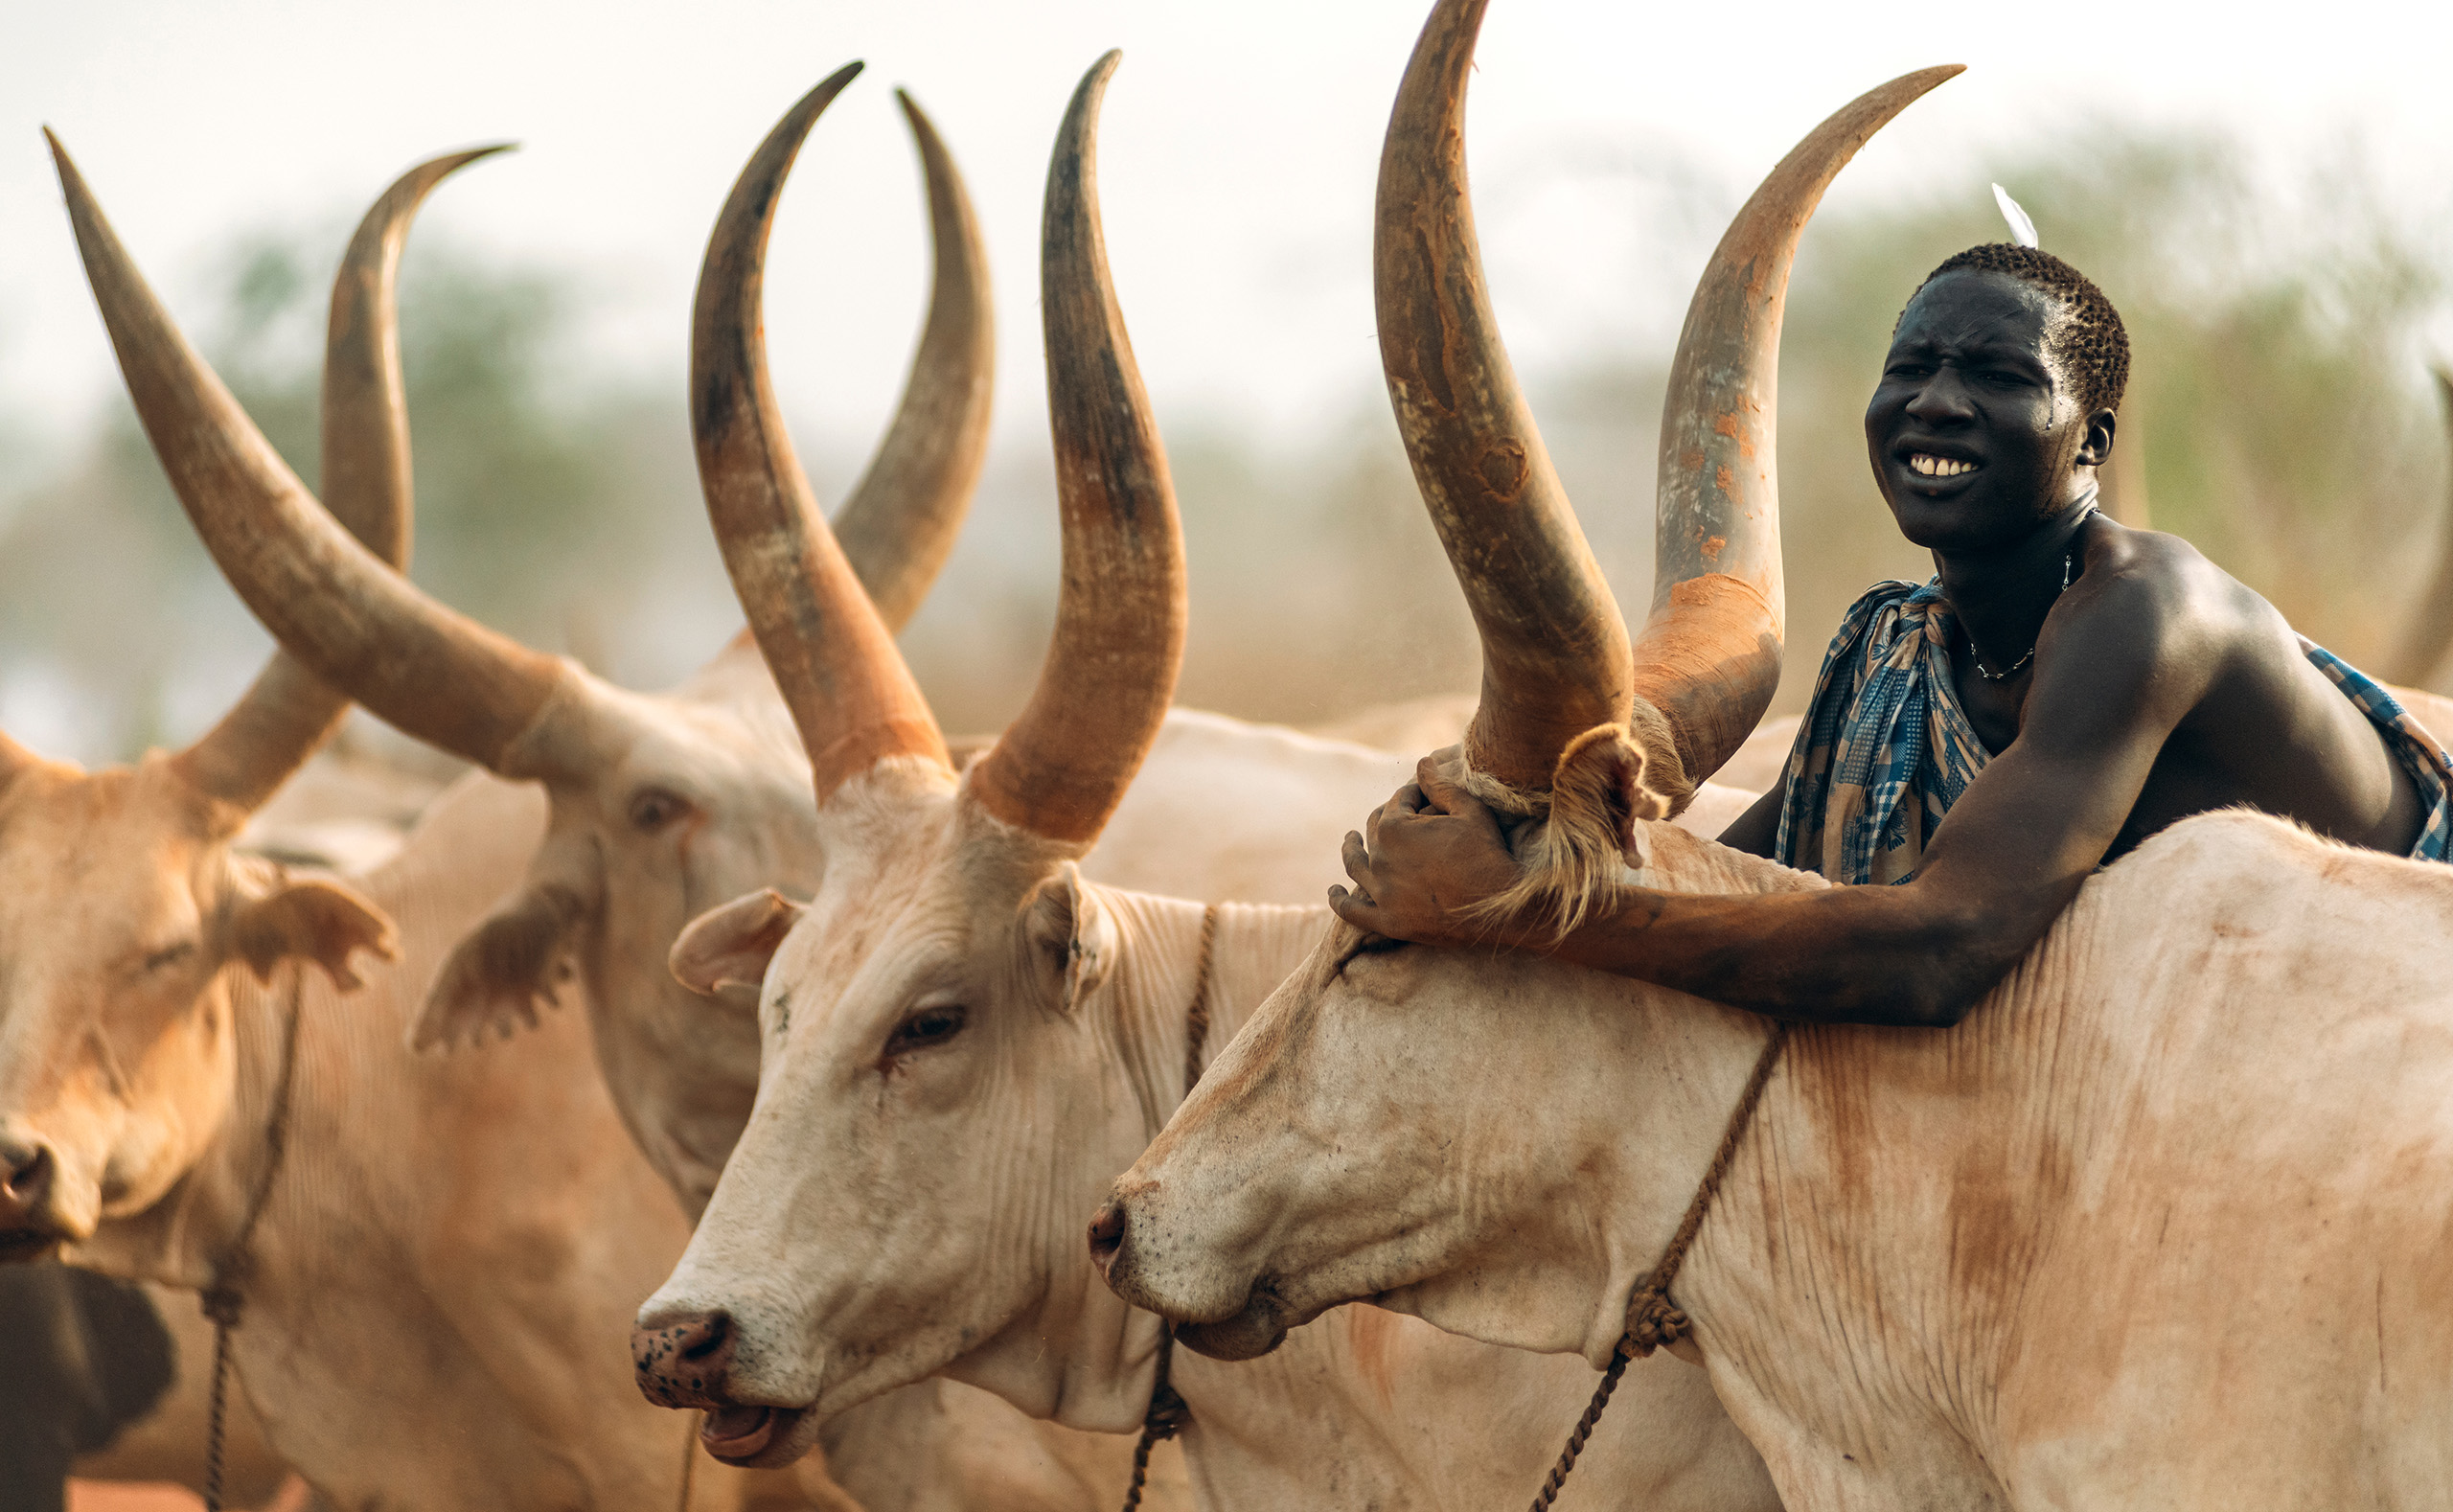 MUNDARI TRIBE, SOUTH SUDAN - MARCH 11, 2020: Man from Mundari Tribe throwing handful of ashes on back of Ankole Watusi cow while herding cattle in savanna in South Sudan, Africa